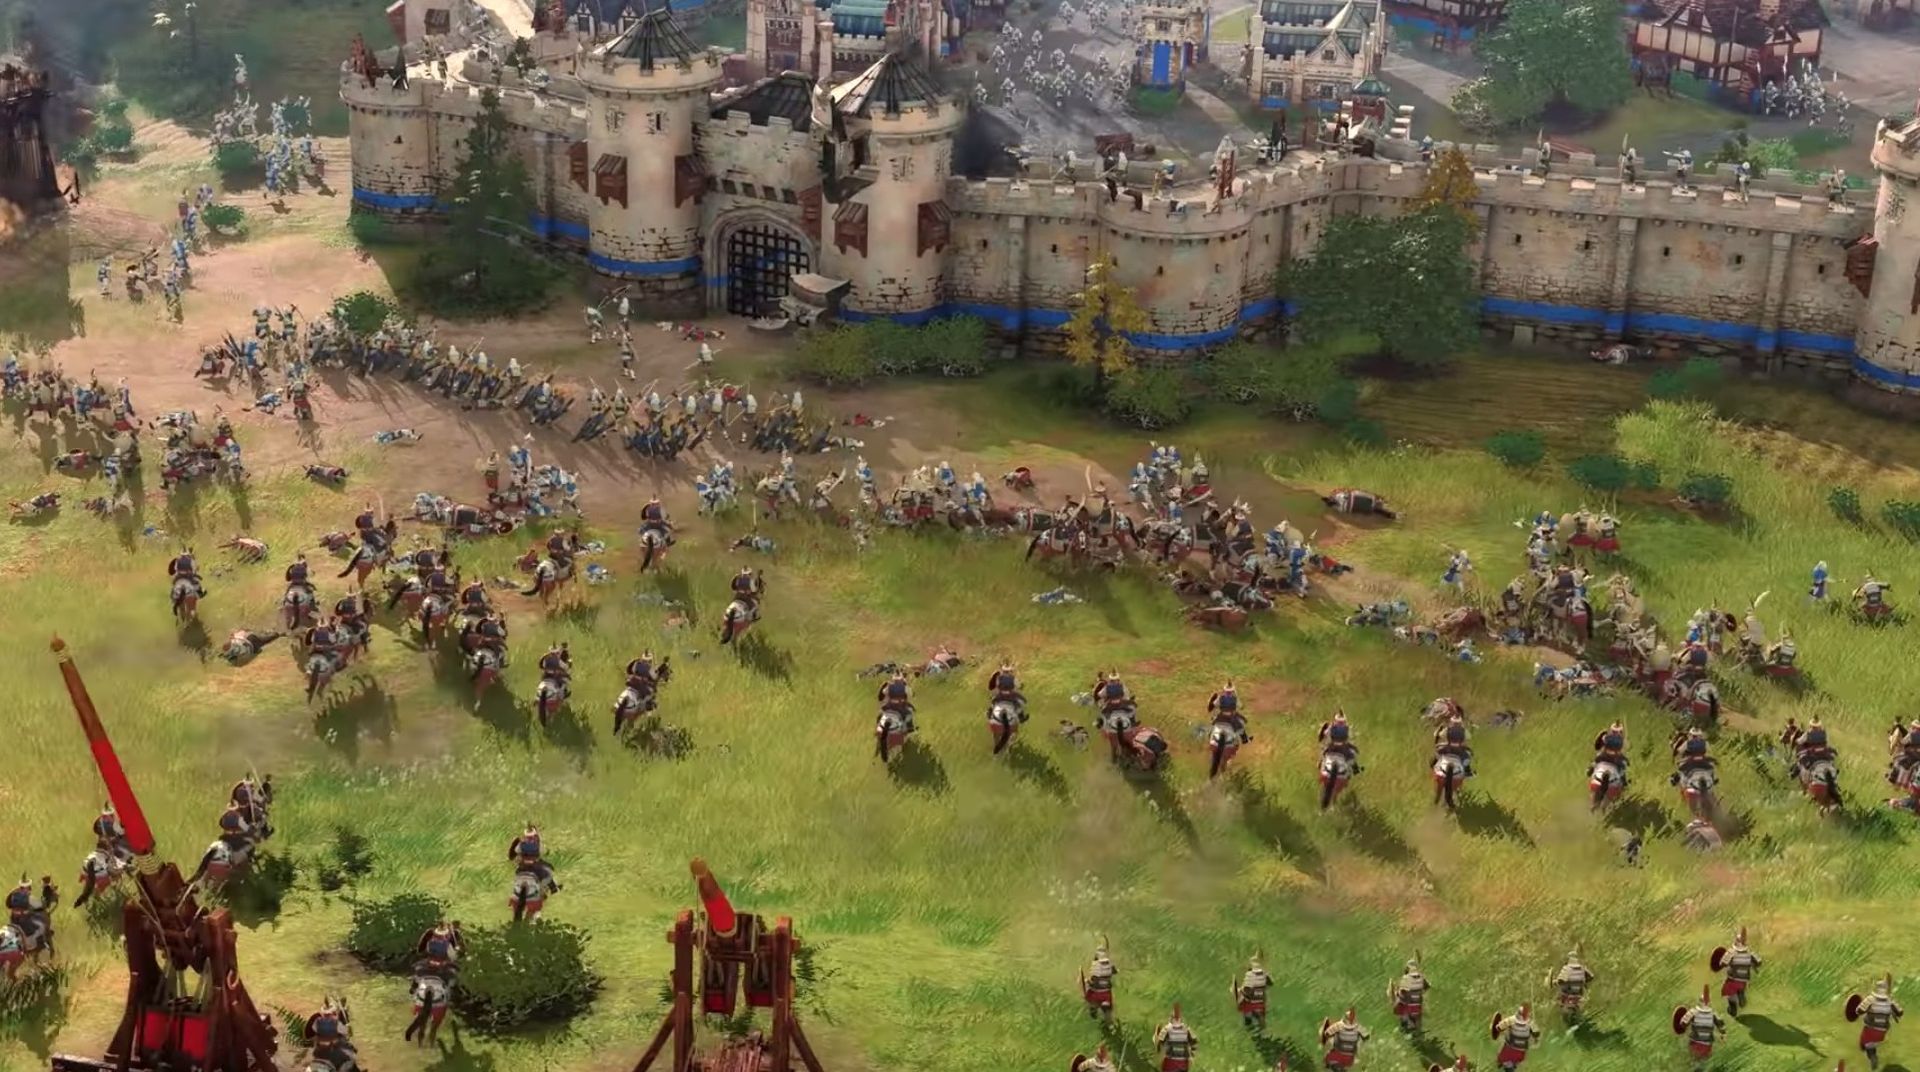 Age Of Empires 4 Gameplay Trailer Shows Off Beautiful Medieval Rts Warfare Techradar 2655